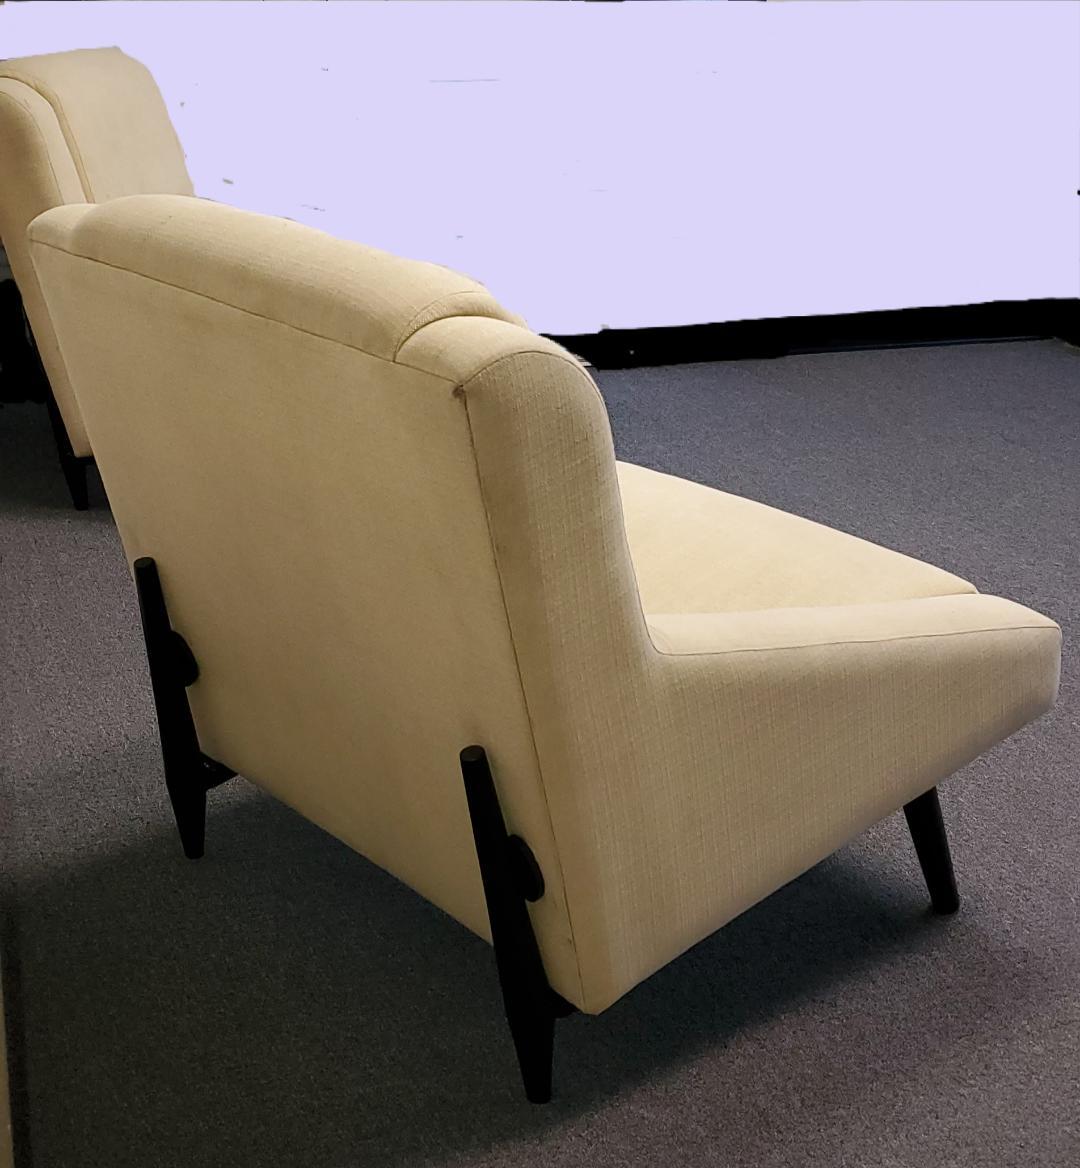 1990s Vintage Barely Yellow Upholstered Club Chairs / Lounge Chairs, A Set of 2 For Sale 5